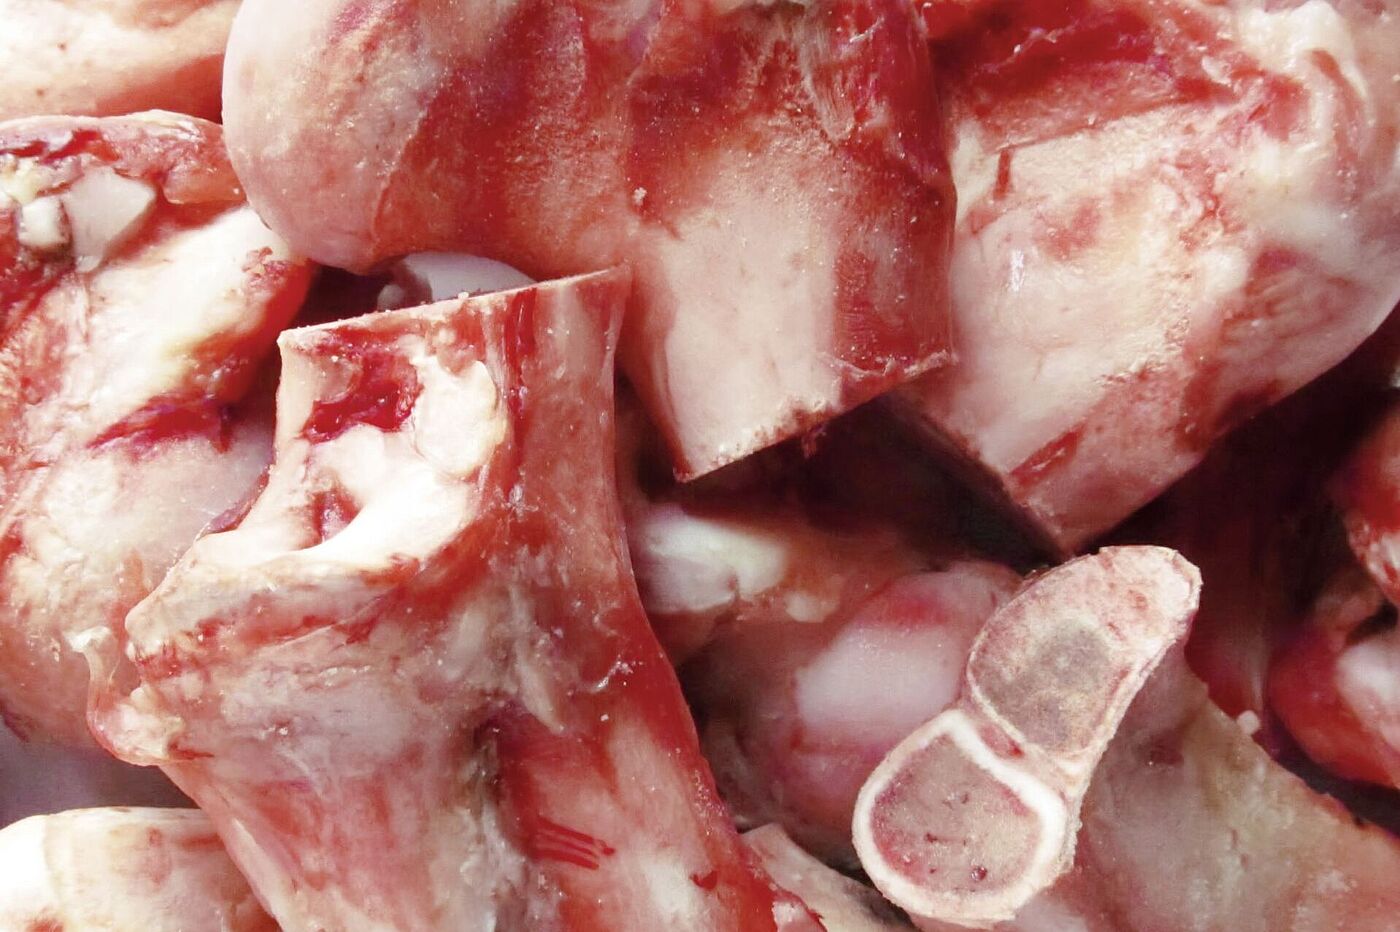 Bones, a by product in the meat industry